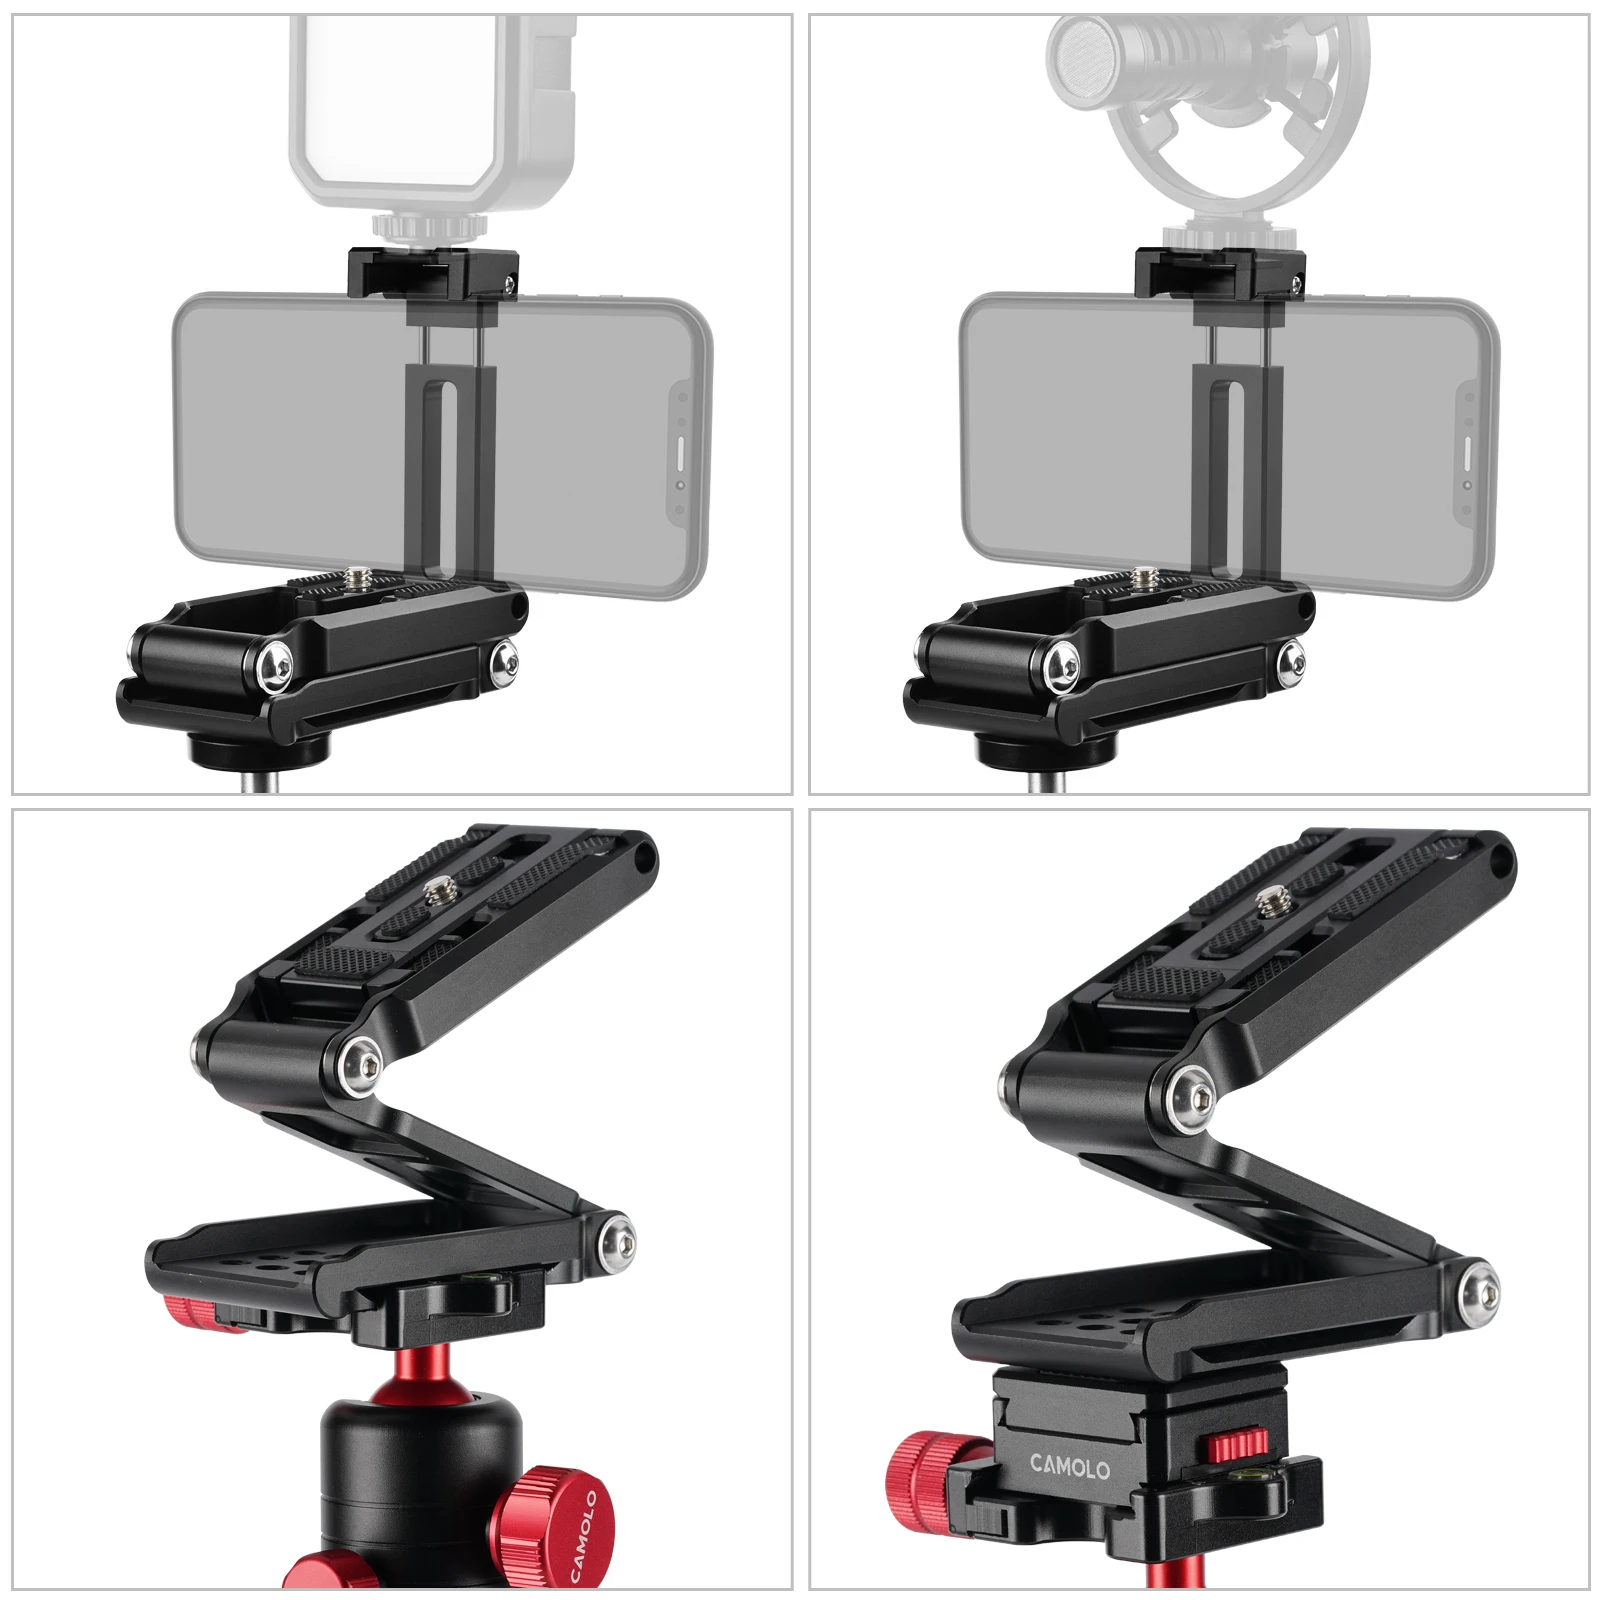 

CAMOLO Z-Shape Foldable Phone Holder with Cold Shoe Mount and M3 Hexagonal Screwdriver for Iphone Xiaomi Huawei Camera